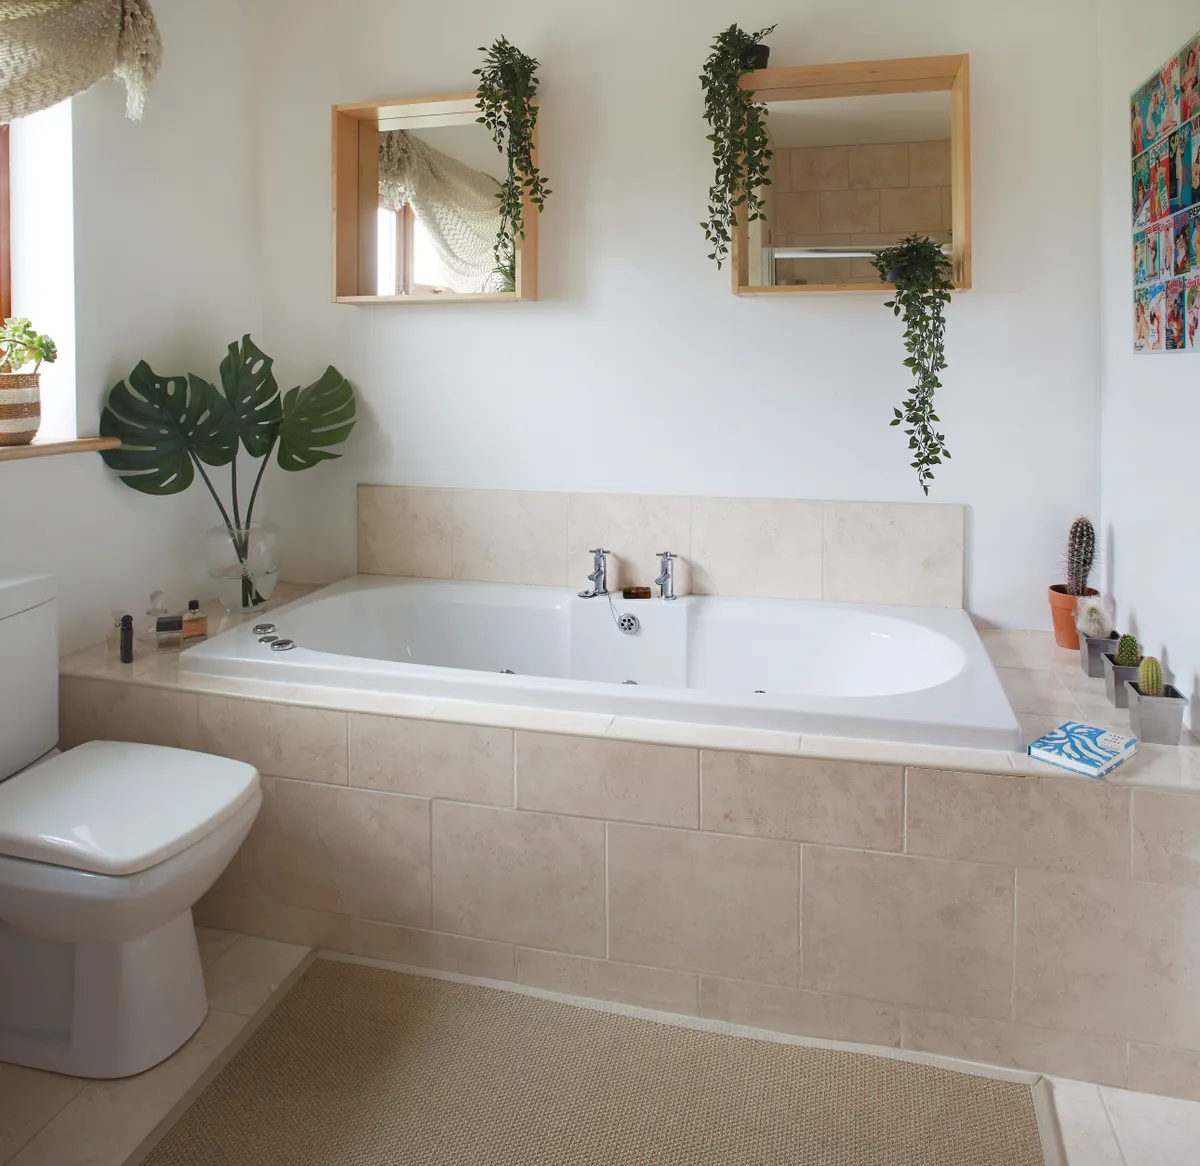 The basic bathroom is slated for refurbishment, but Elaine has cheered it up with mirrors and faux trailing plants from IKEA and an art print from TK Maxx. The faux cheese plant leaves are also from IKEA and the tiles are from Armatile